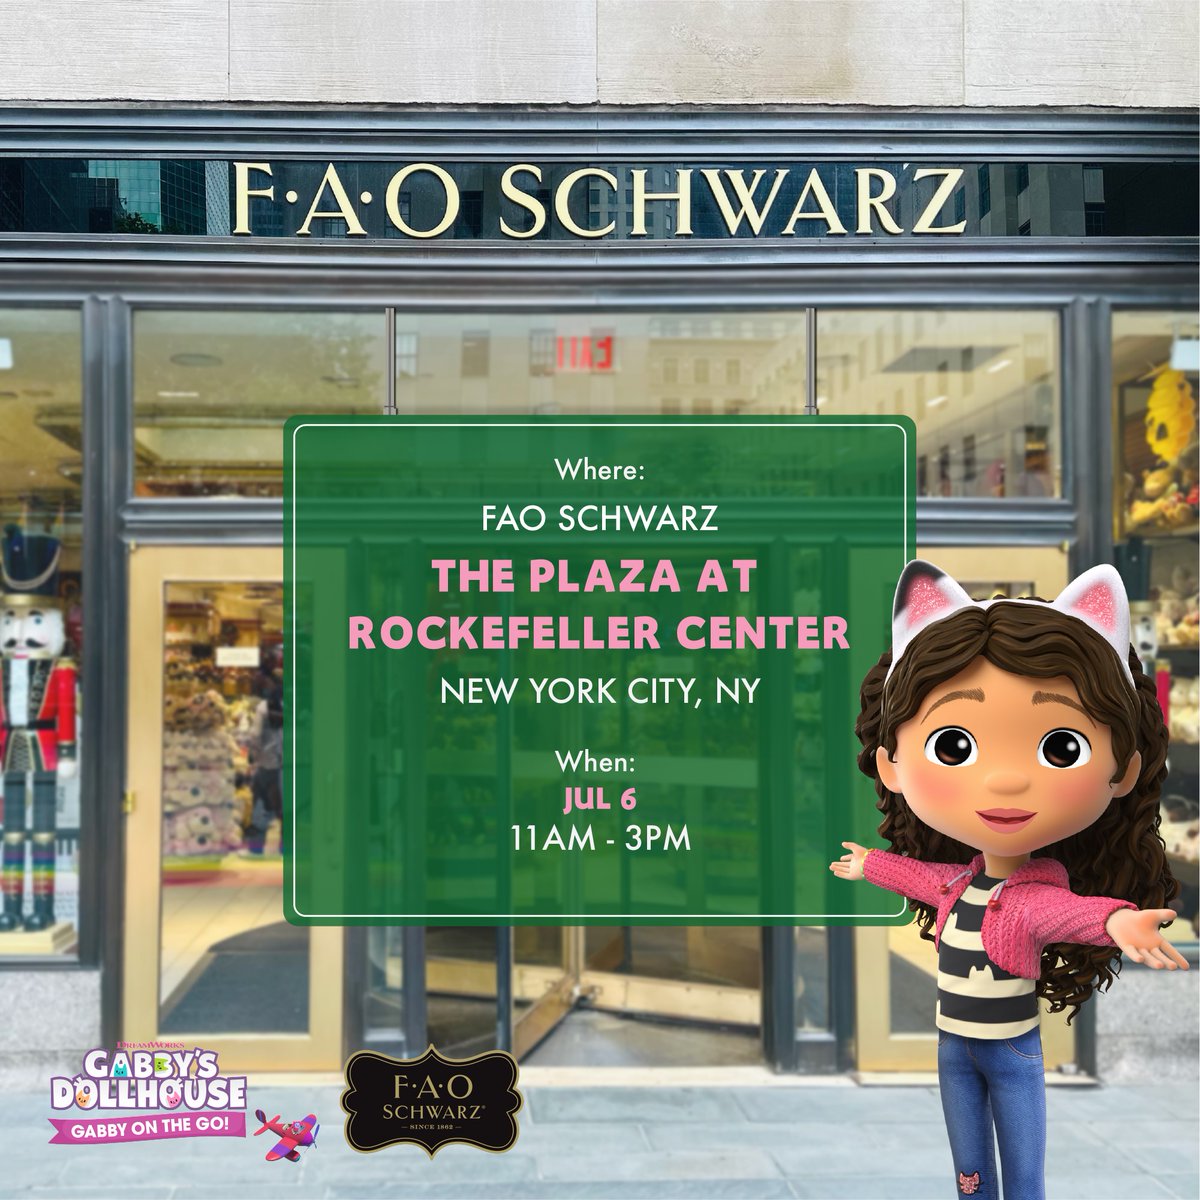 Get ready for an a-meow-zing time with Gabby at FAO Schwarz! Reserve your free ticket now to secure your spot for this adventure 😻 bit.ly/3NsU5Bj #FAOSchwarz #DWGabbyOnTheGo #GabbysDollhouse @dreamworksjr